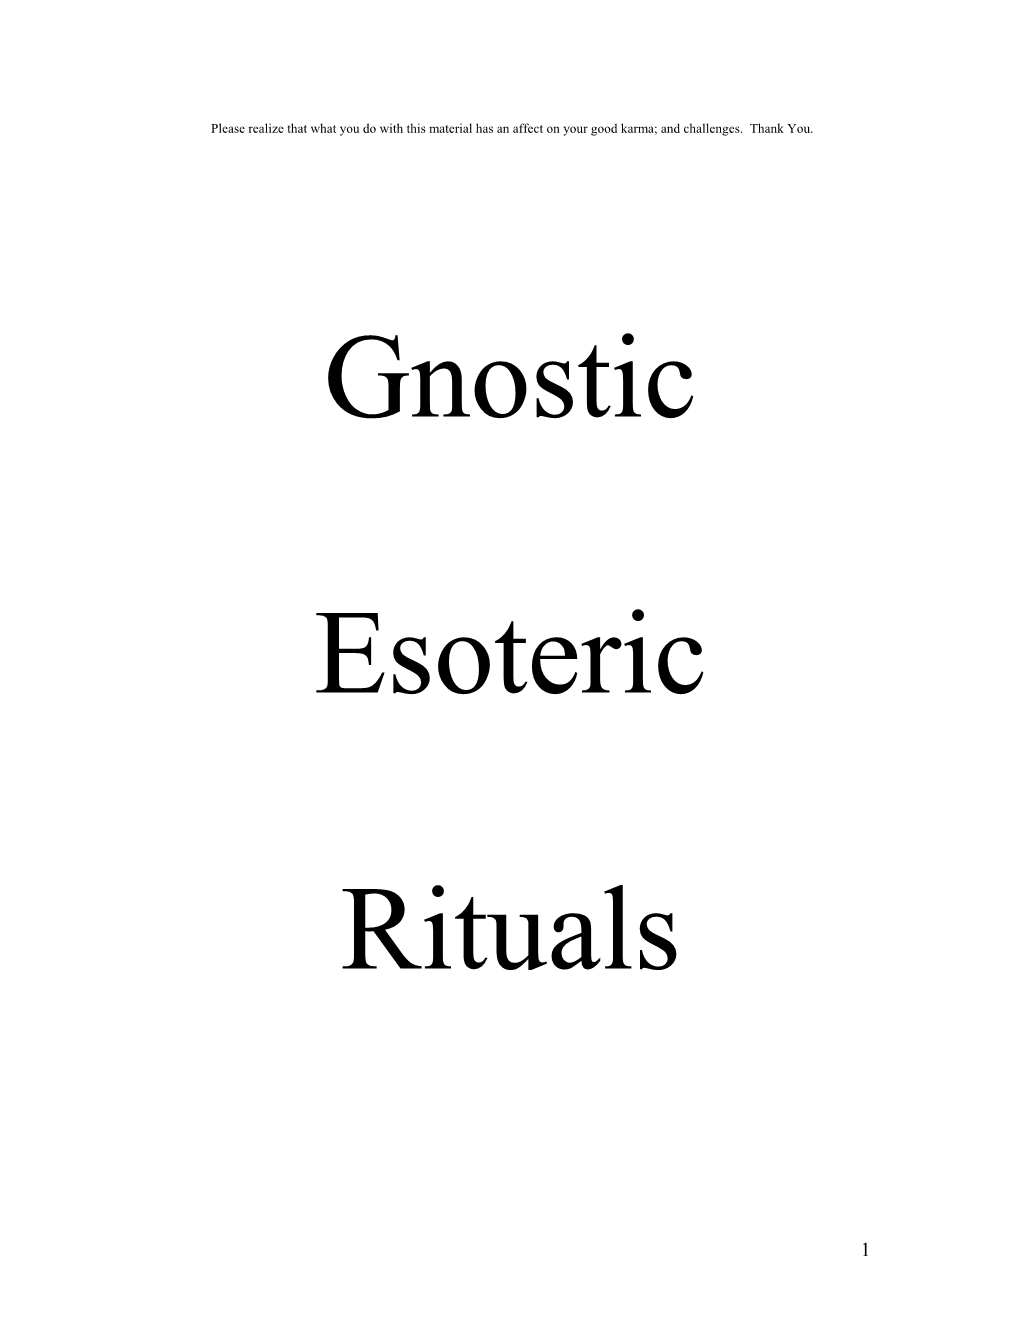 Gnostic Esoteric Ritual of the Mysteries of Eleusis